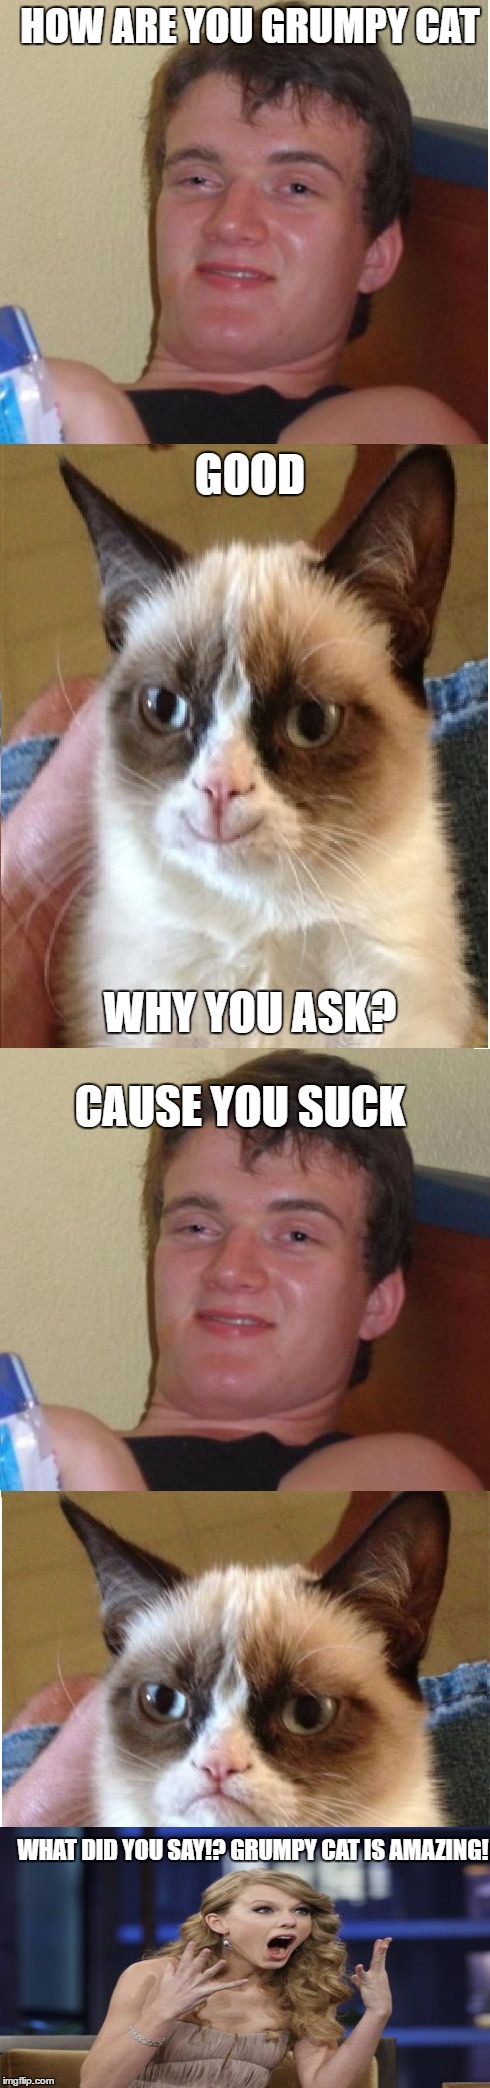 10guy Grumpy Cat | HOW ARE YOU GRUMPY CAT; GOOD; WHY YOU ASK? CAUSE YOU SUCK; WHAT DID YOU SAY!? GRUMPY CAT IS AMAZING! | image tagged in 10guy grumpy cat | made w/ Imgflip meme maker